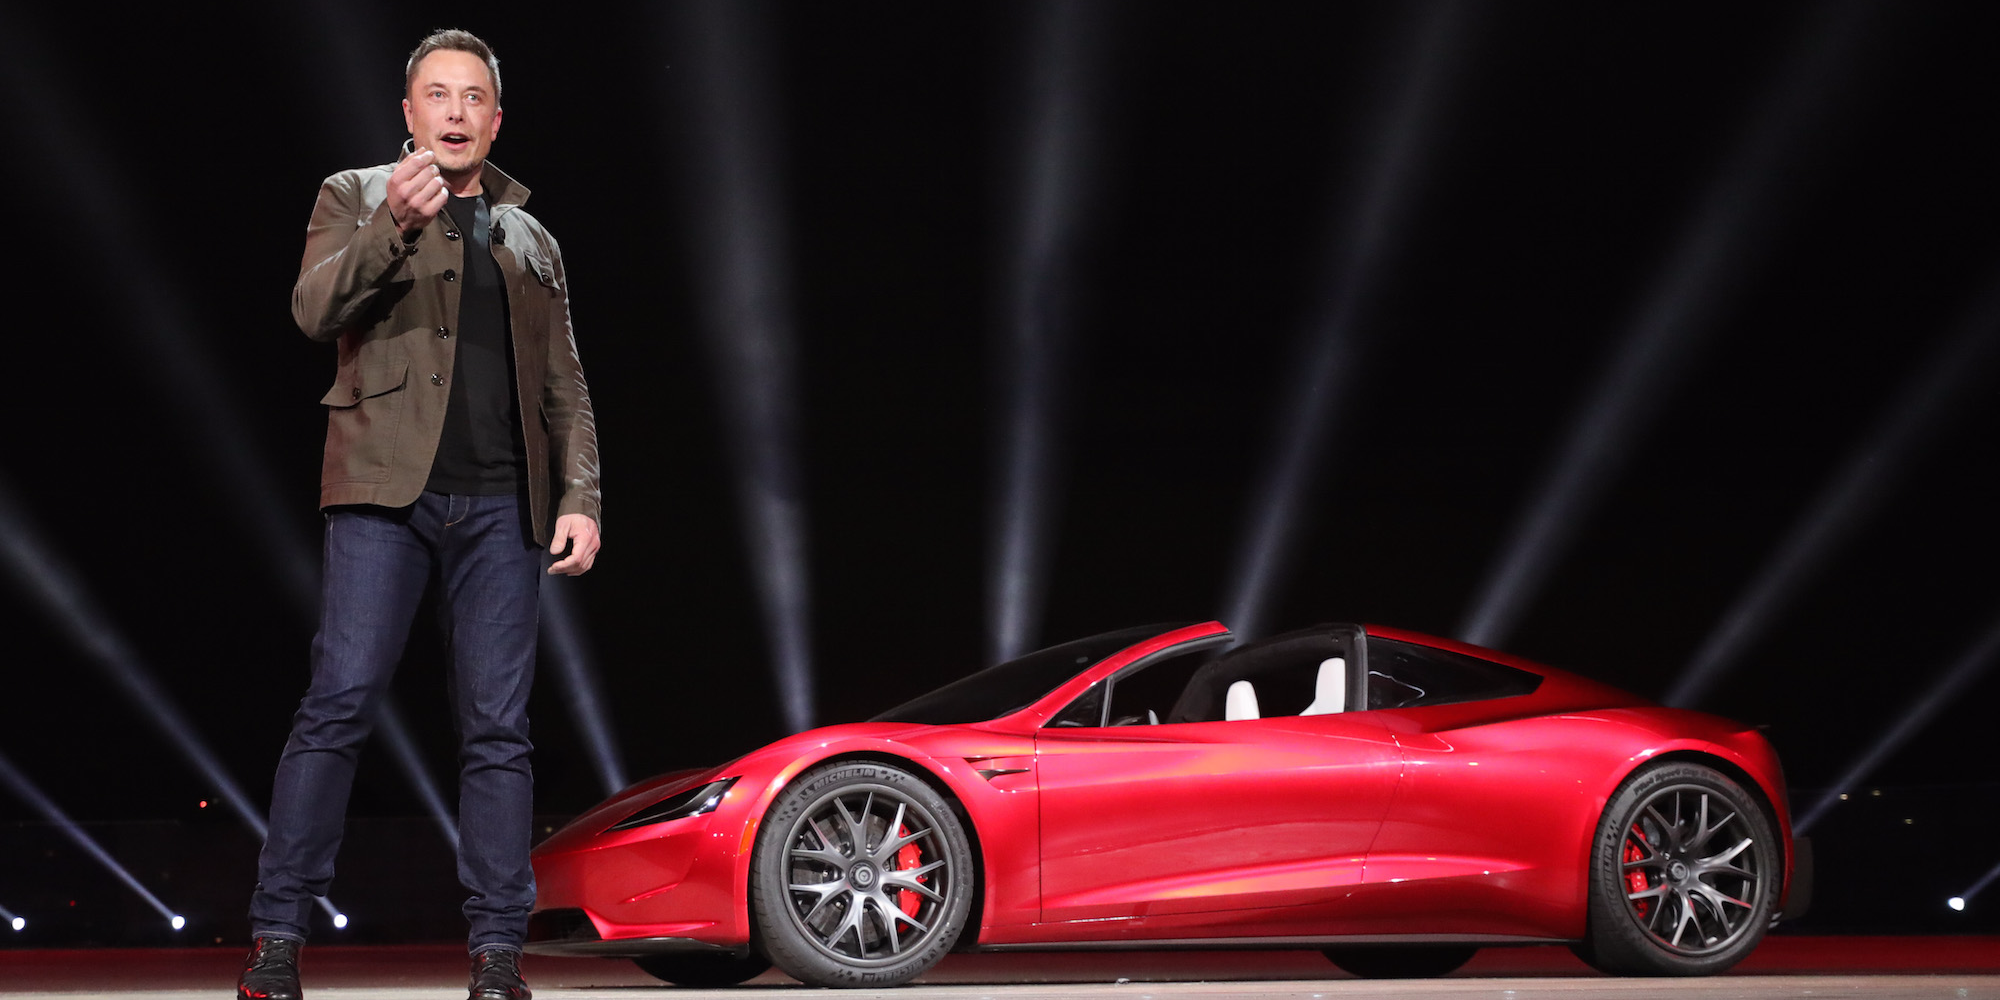 Tesla has a huge lead over other automakers. See how the electric-car company’s brand became so mighty. (TSLA)